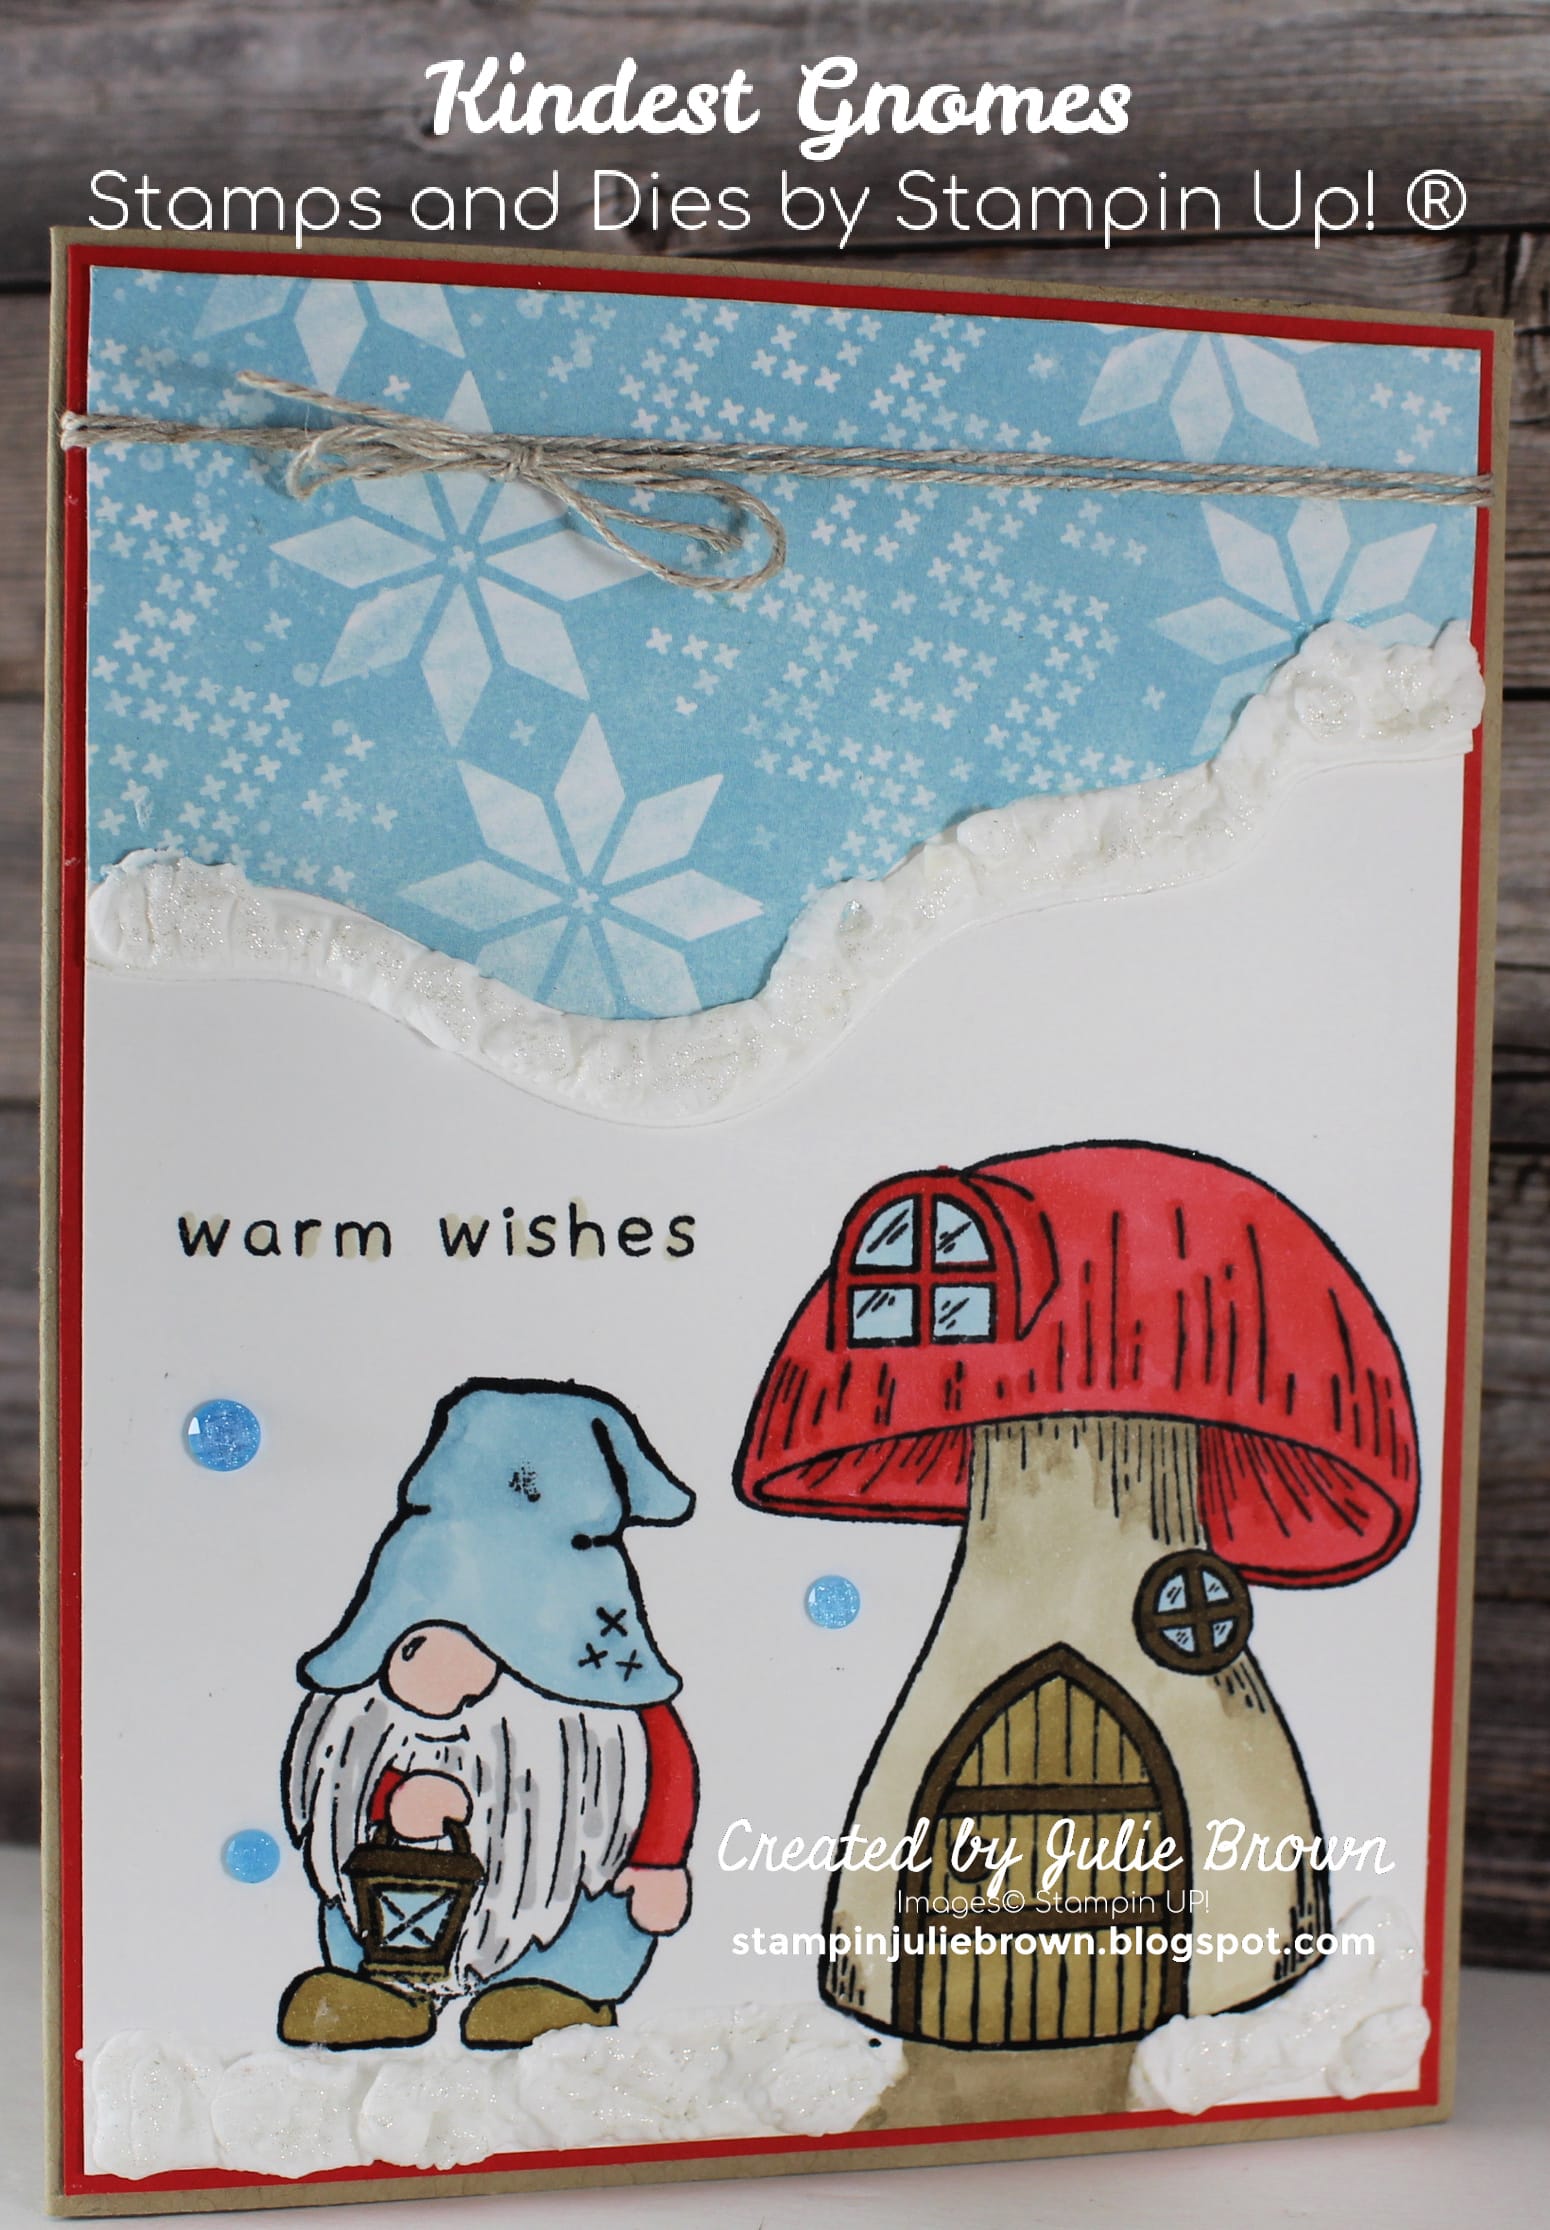 Card designed with the Kindest Gnomes Stamp set by Stampin Up® Showing how it looks when colored in with Blends using the Mushroom house on bottom right of Basic White card front and a Gnome holding a lantern to the left of the Mushroom.  Gnome and Mushroom have been colored in using Real Red, Crumb Cake and Soft Suede for the Mushroom and Balmy Blue, Soft Suede and Real Red for the Gnome.  Stamped section layered onto Designer Series Paper with snowflake designs.